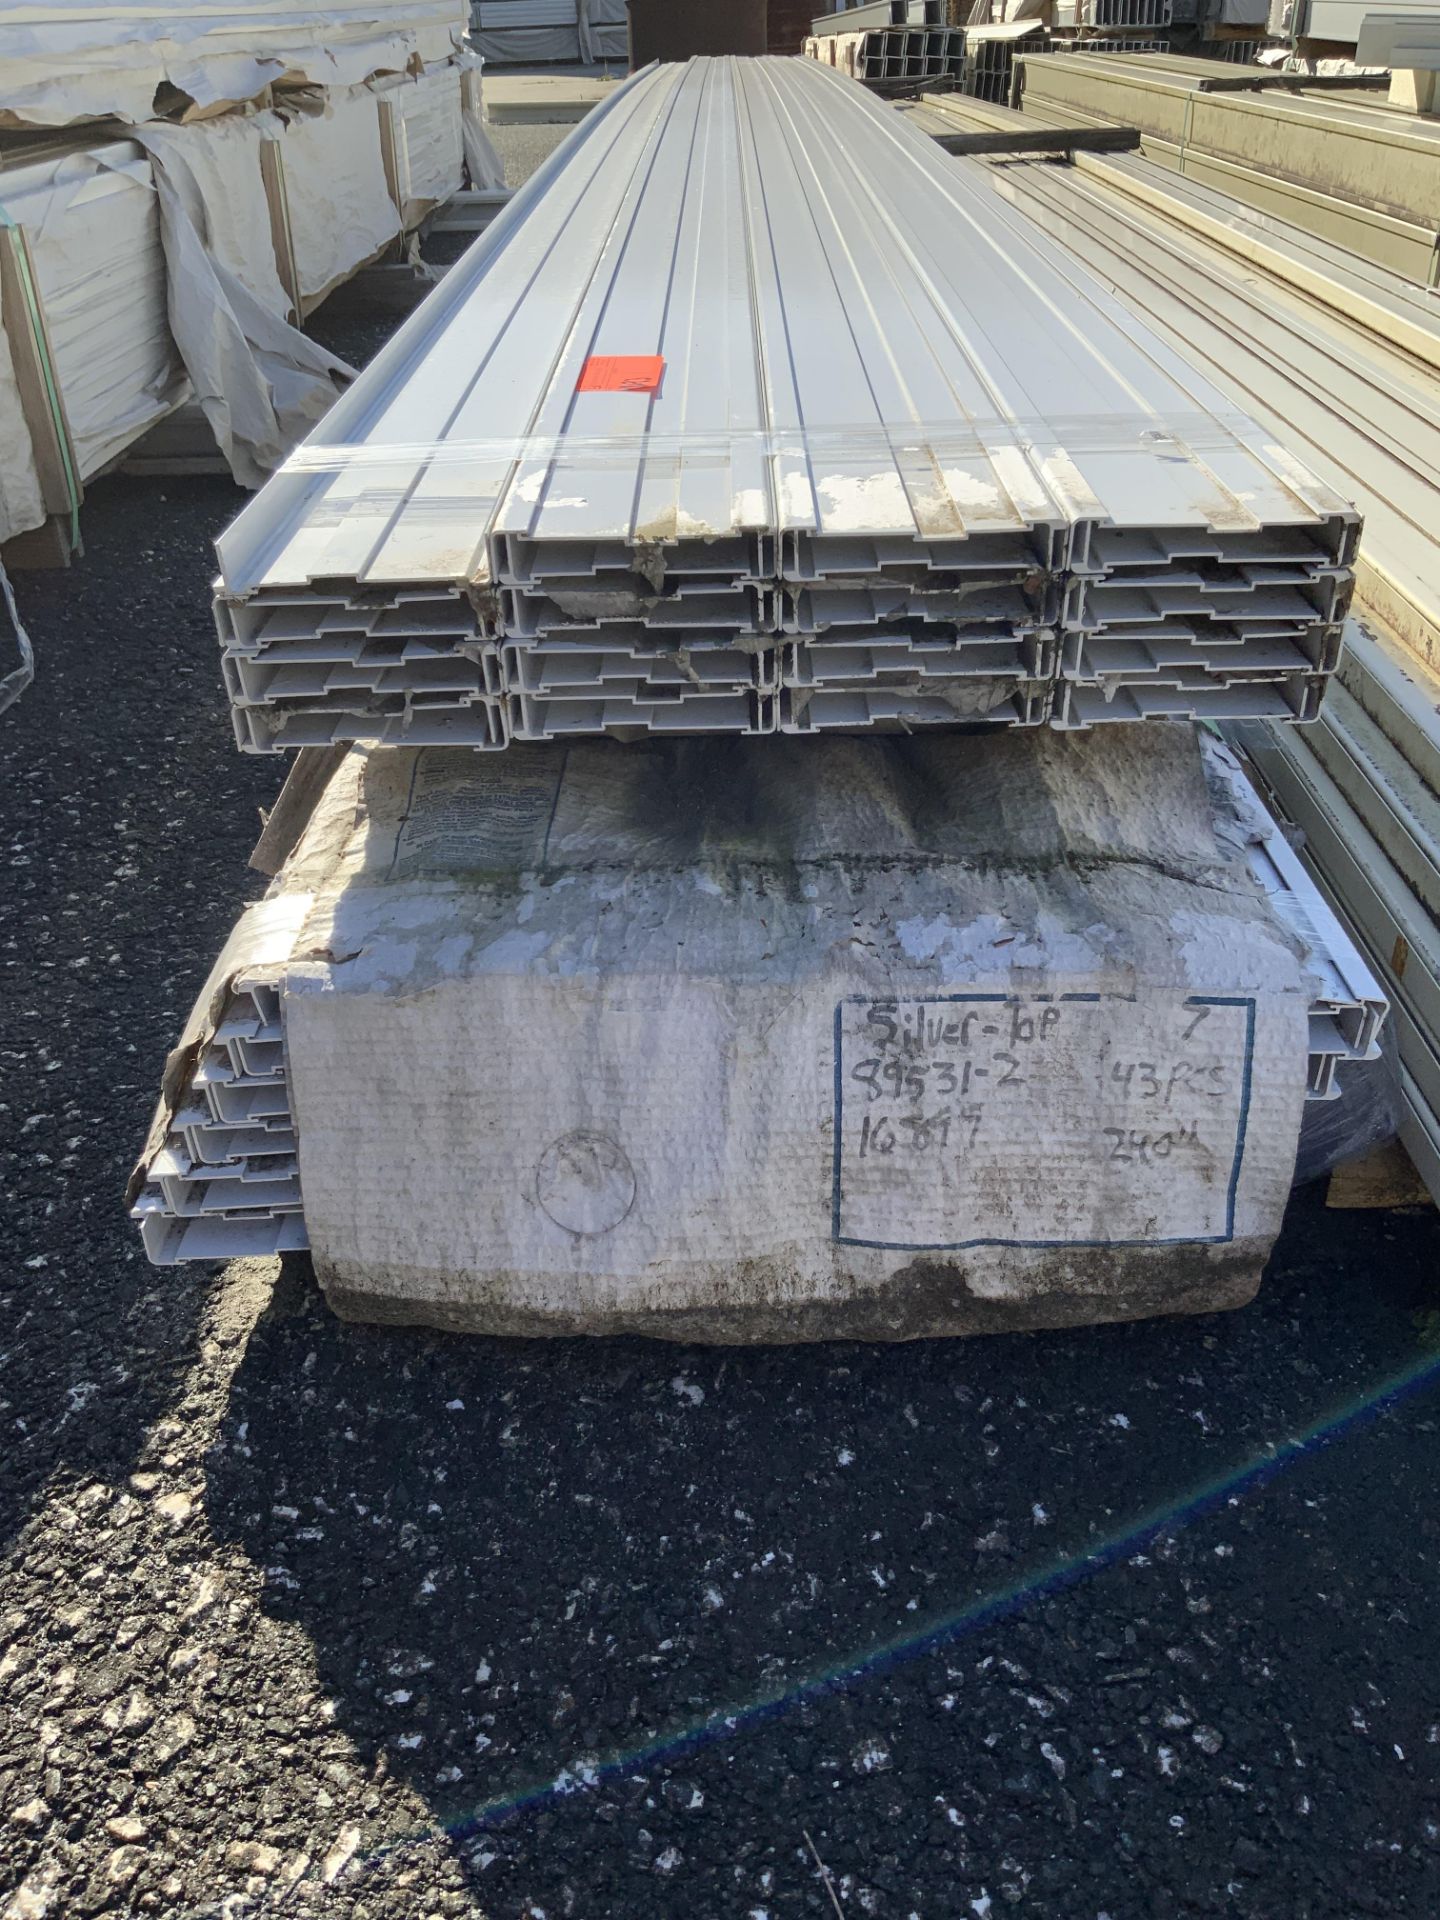 Extruded Aluminum Stock of Various Sizes - Image 4 of 5